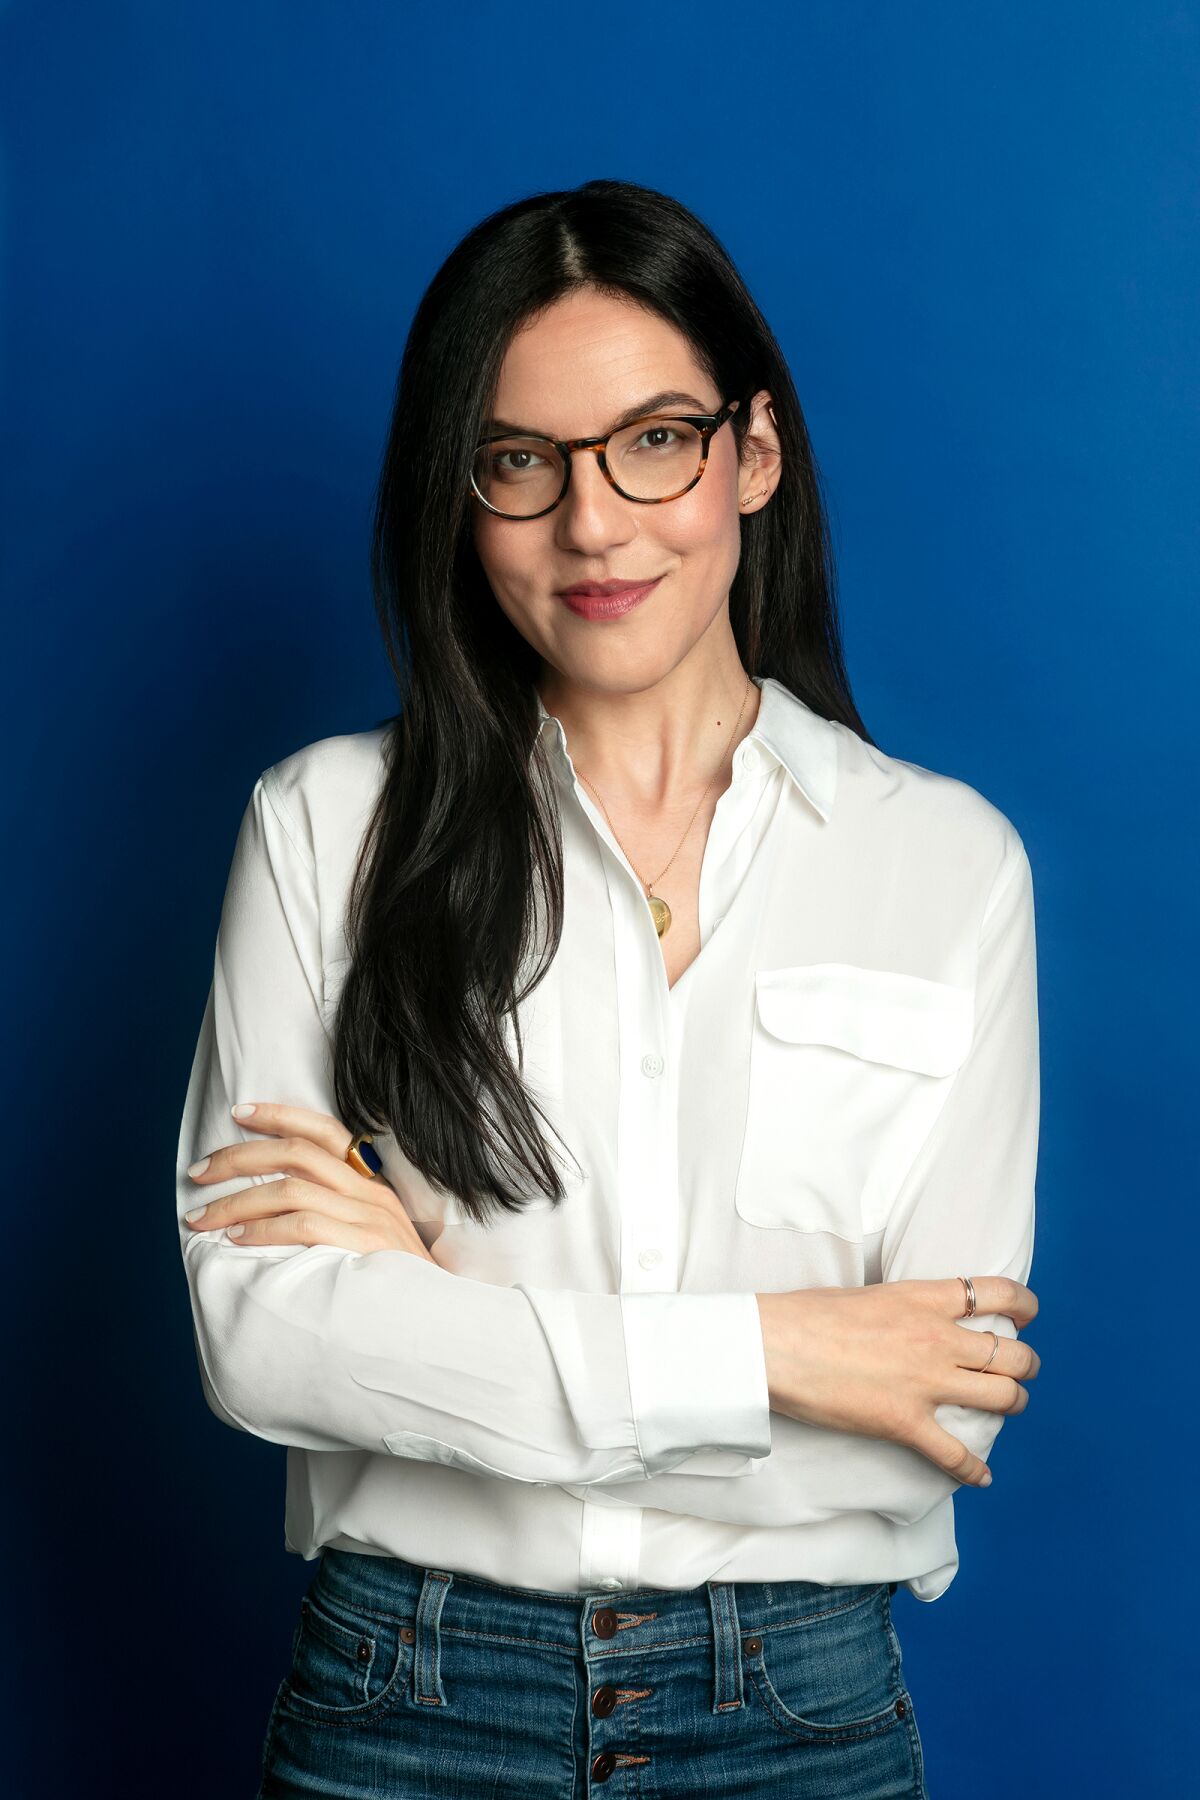 A woman in glasses, a white button-down shirt and jeans folds her arms.